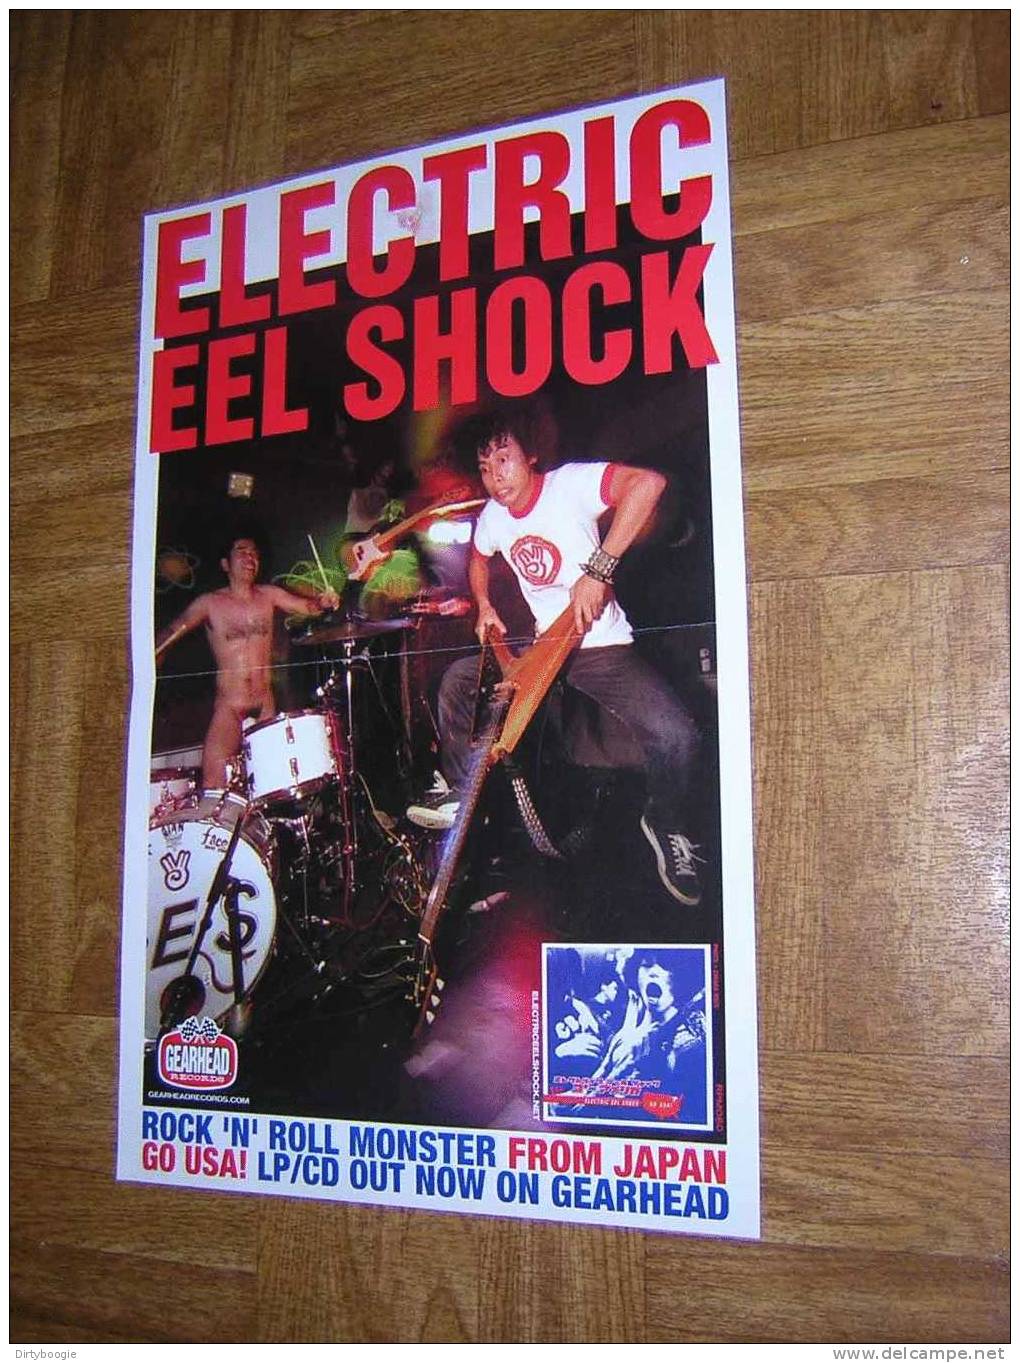 ELECTRIC EEL SHOCK - AFFICHETTE - ROCK'N'ROLL MONSTER FROM JAPAN - GEARHEAD RECORDS - Afiches & Pósters